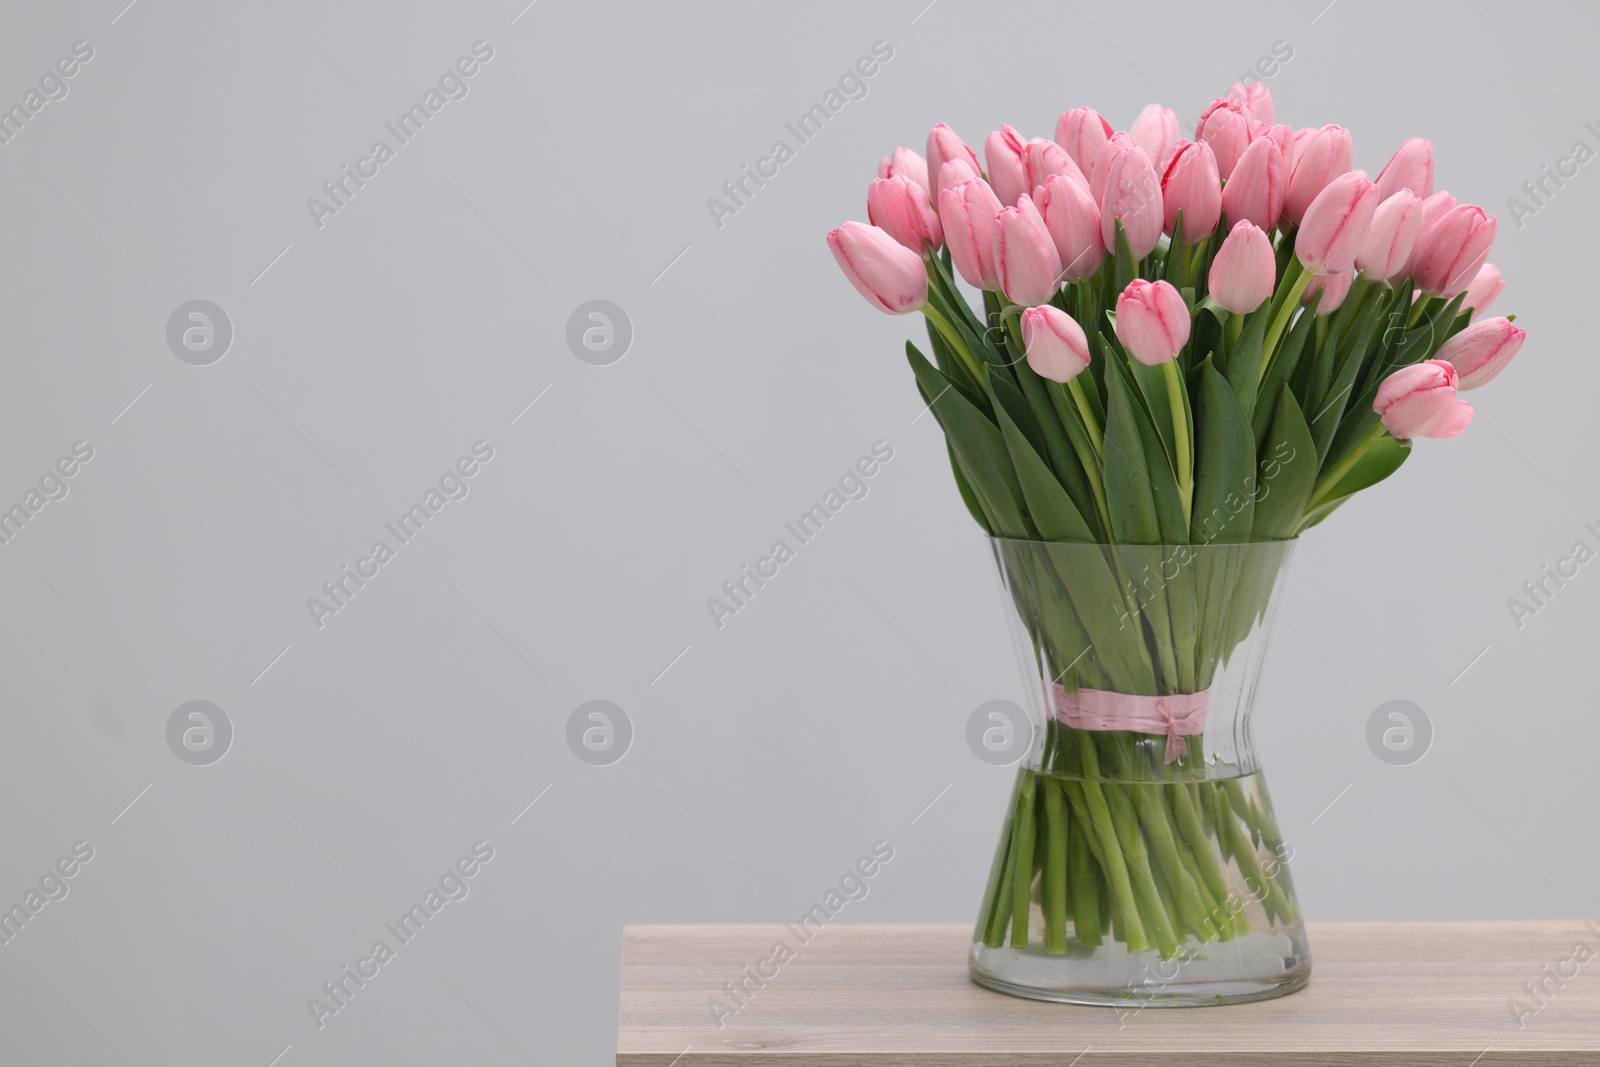 Photo of Bouquet of beautiful pink tulips in vase on wooden table against grey background, space for text